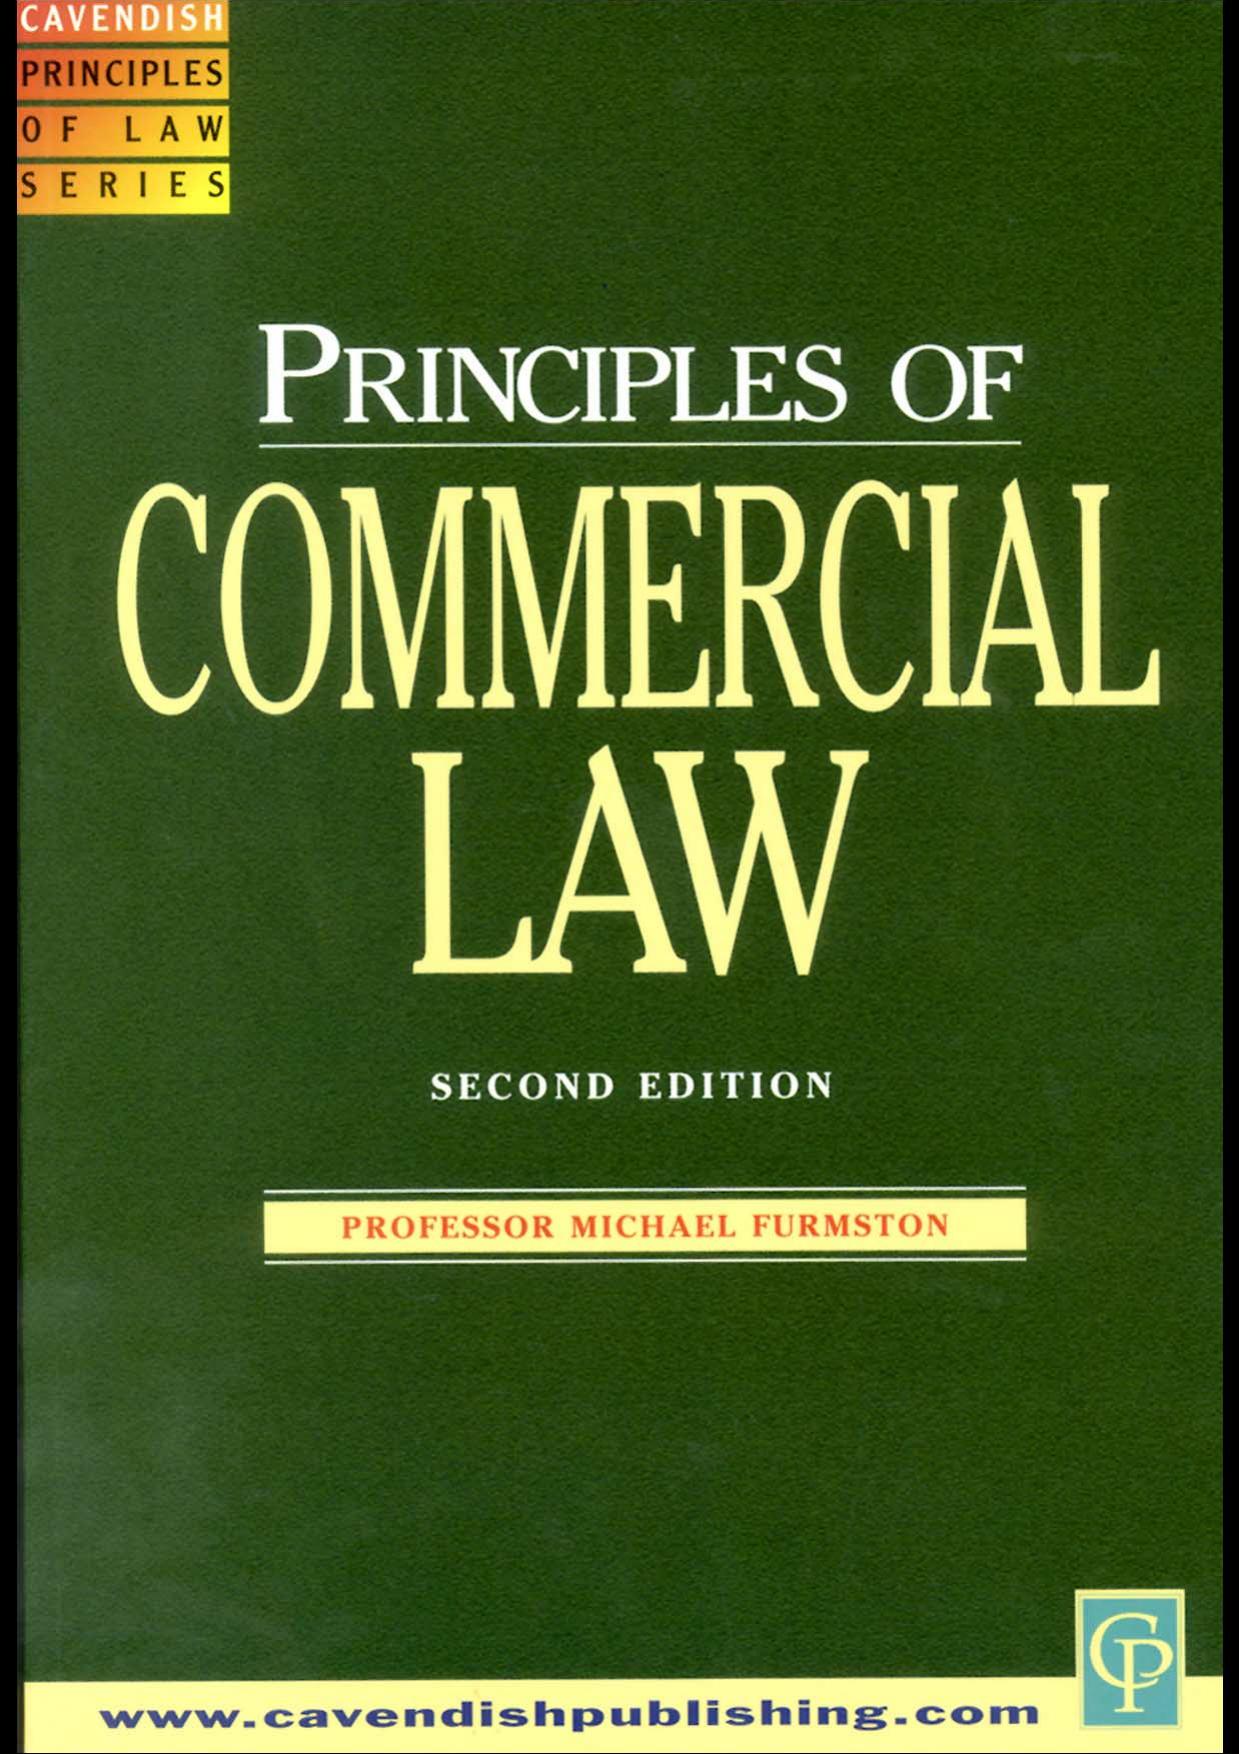 Principles of Commercial Law, Second Edition